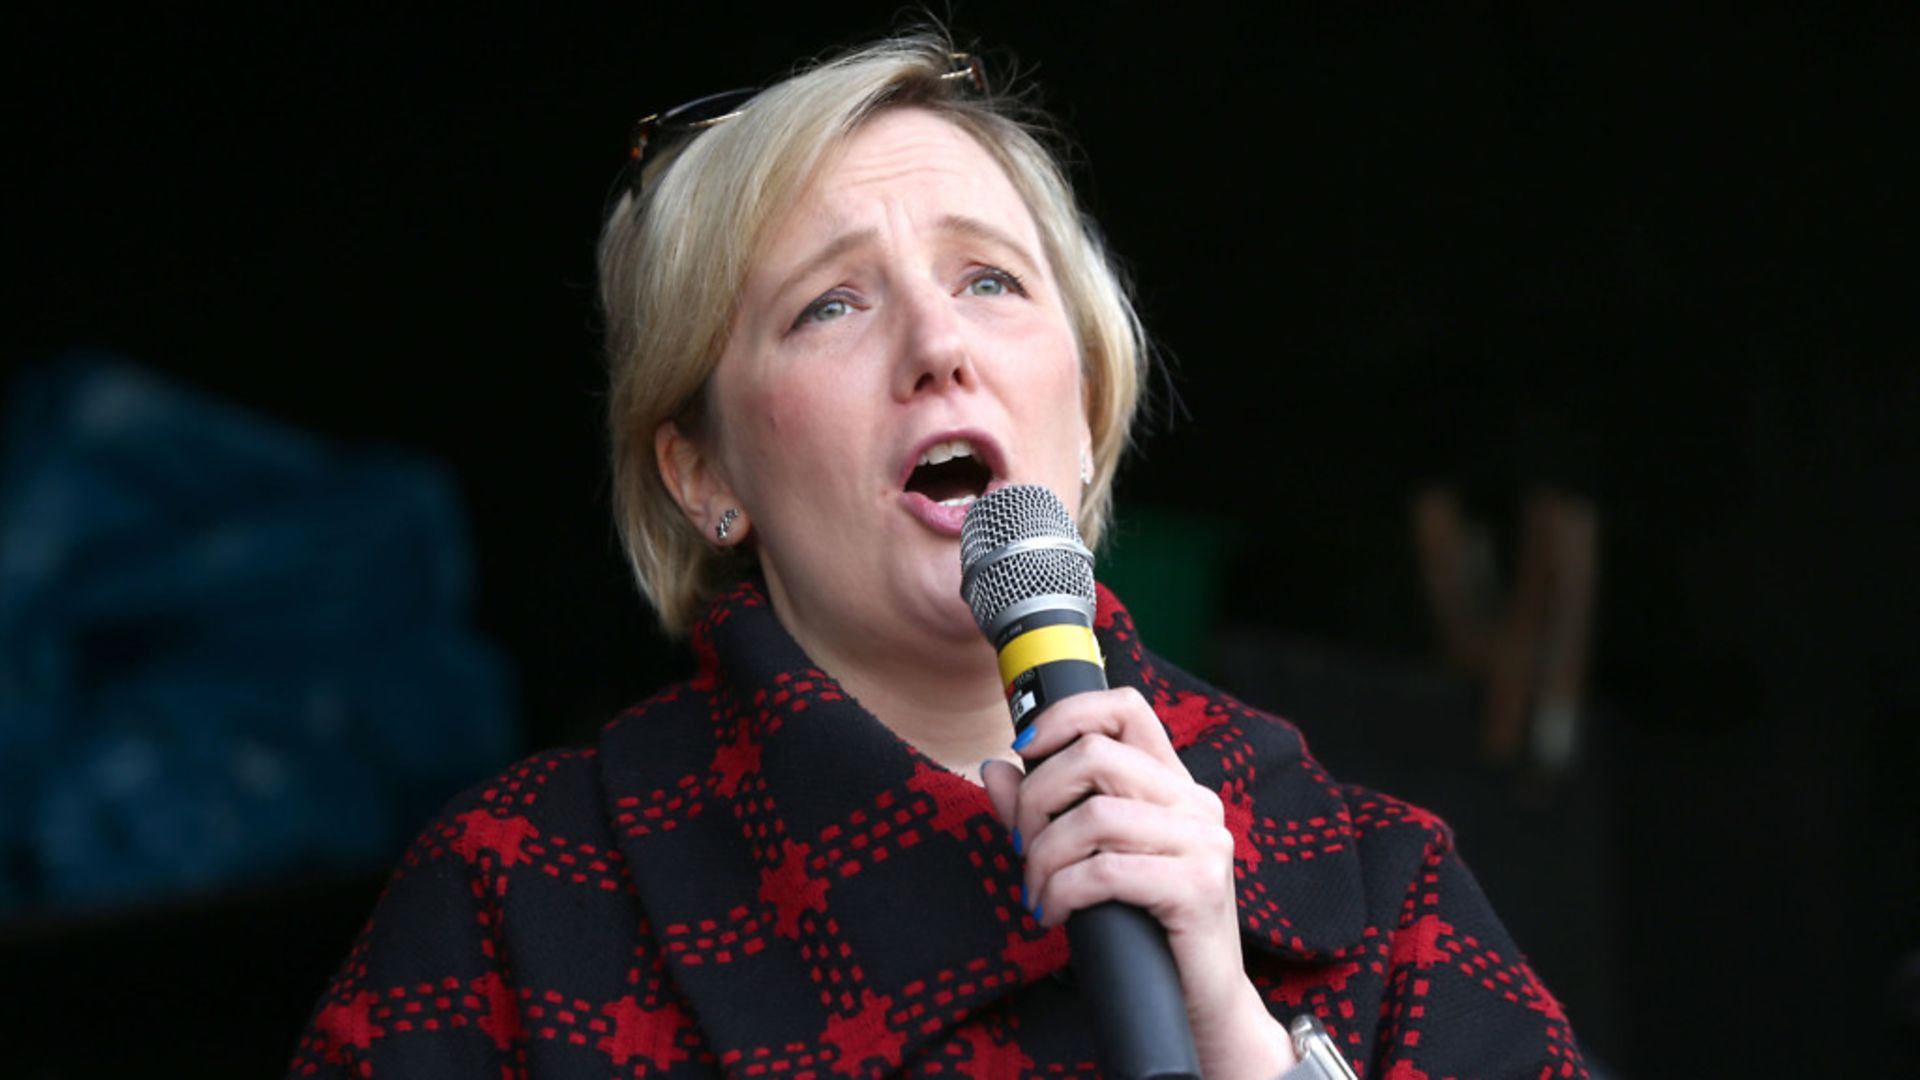 Labour MP Stella Creasy (pictured above) has threatened legal against the government's legislation on maternity pay - Credit: Yui Mok/PA Wire